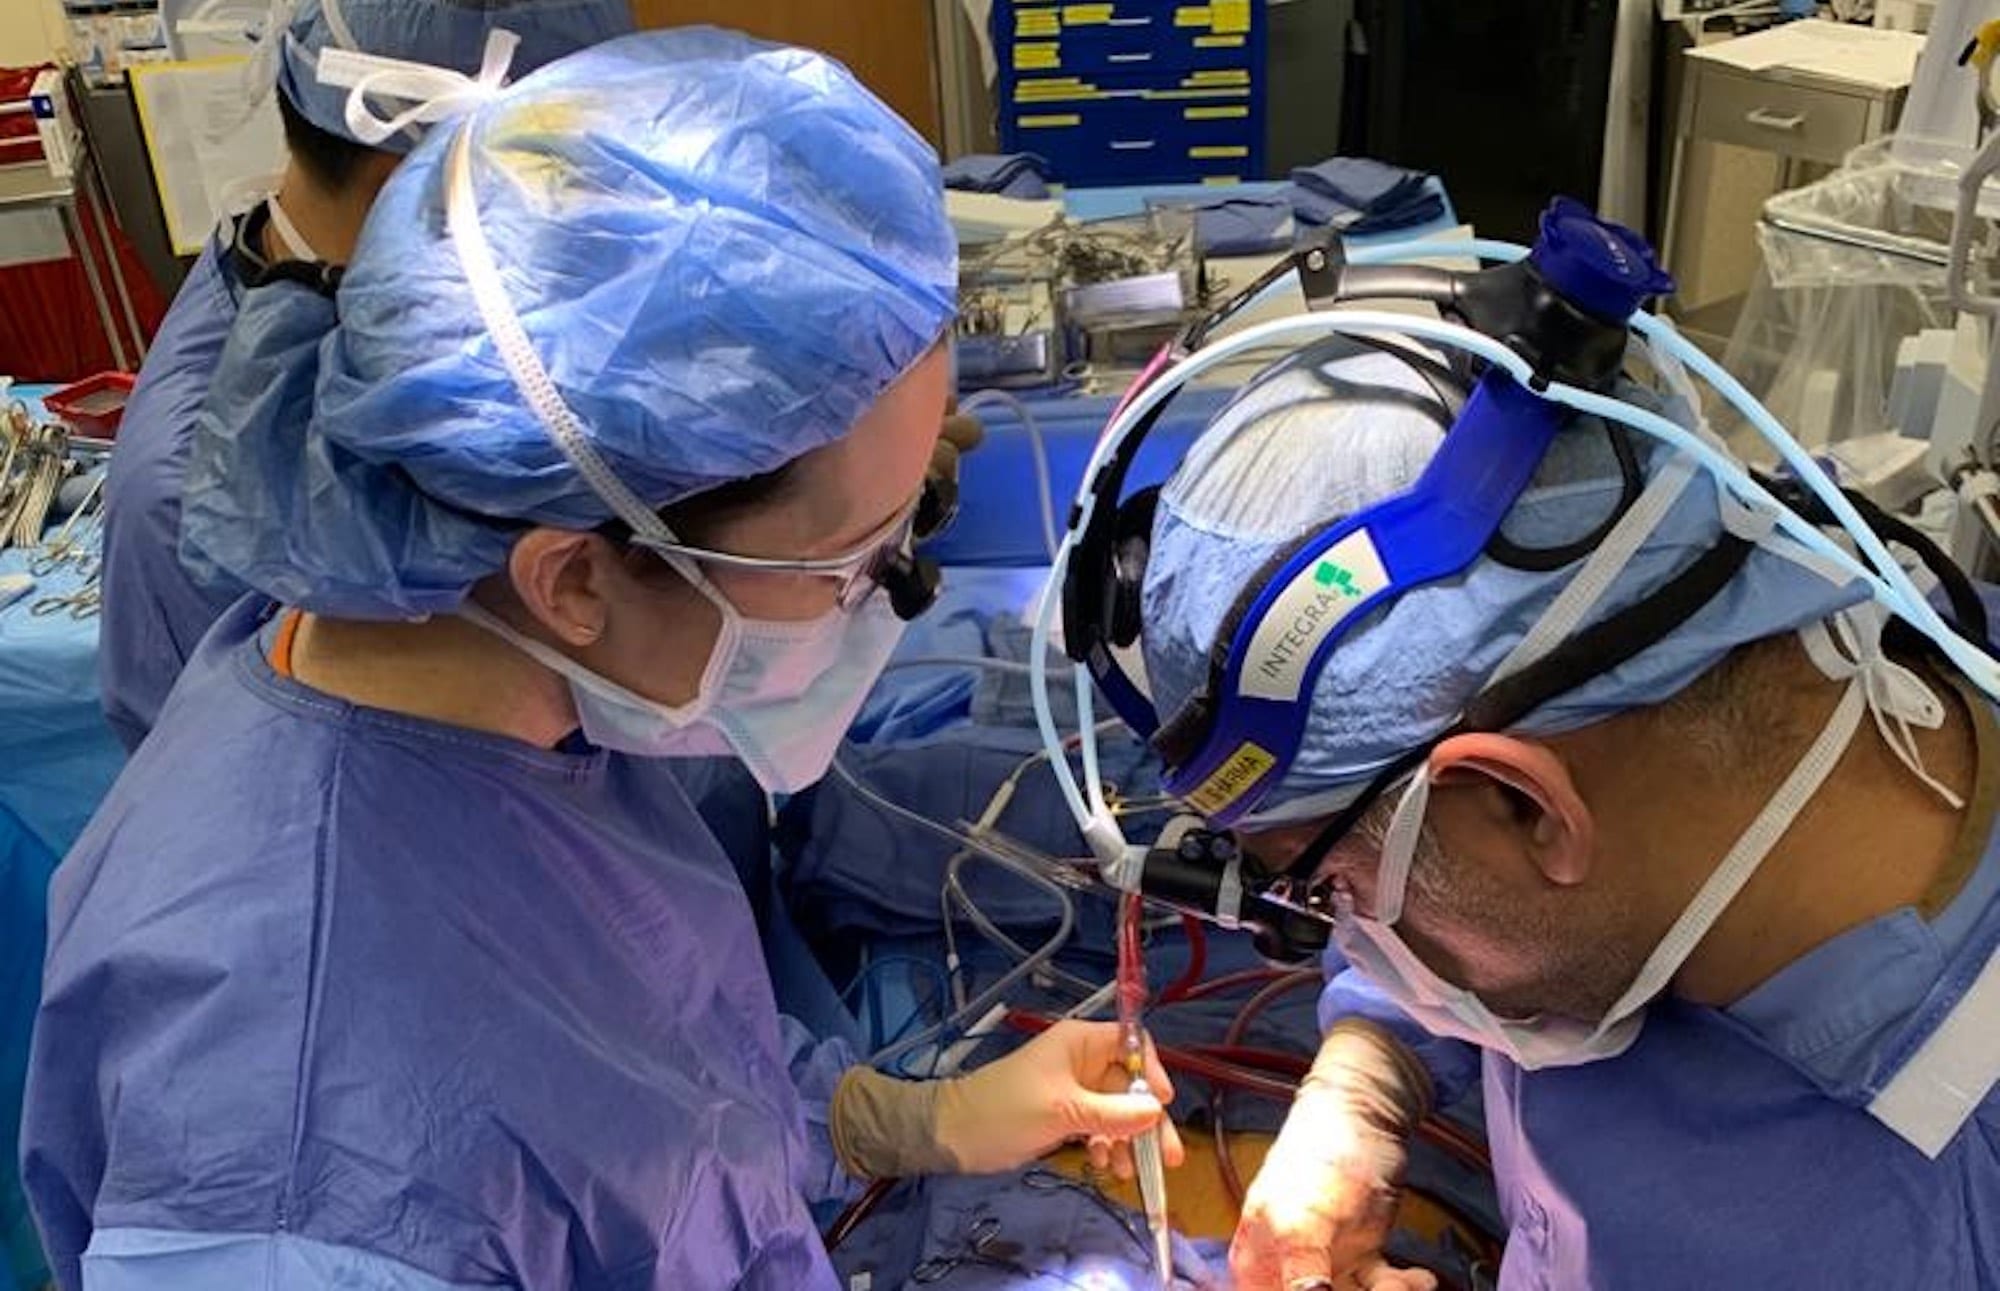 A cardiac surgeon asked for help during the COVID-19 crisis. His classmates stepped up.